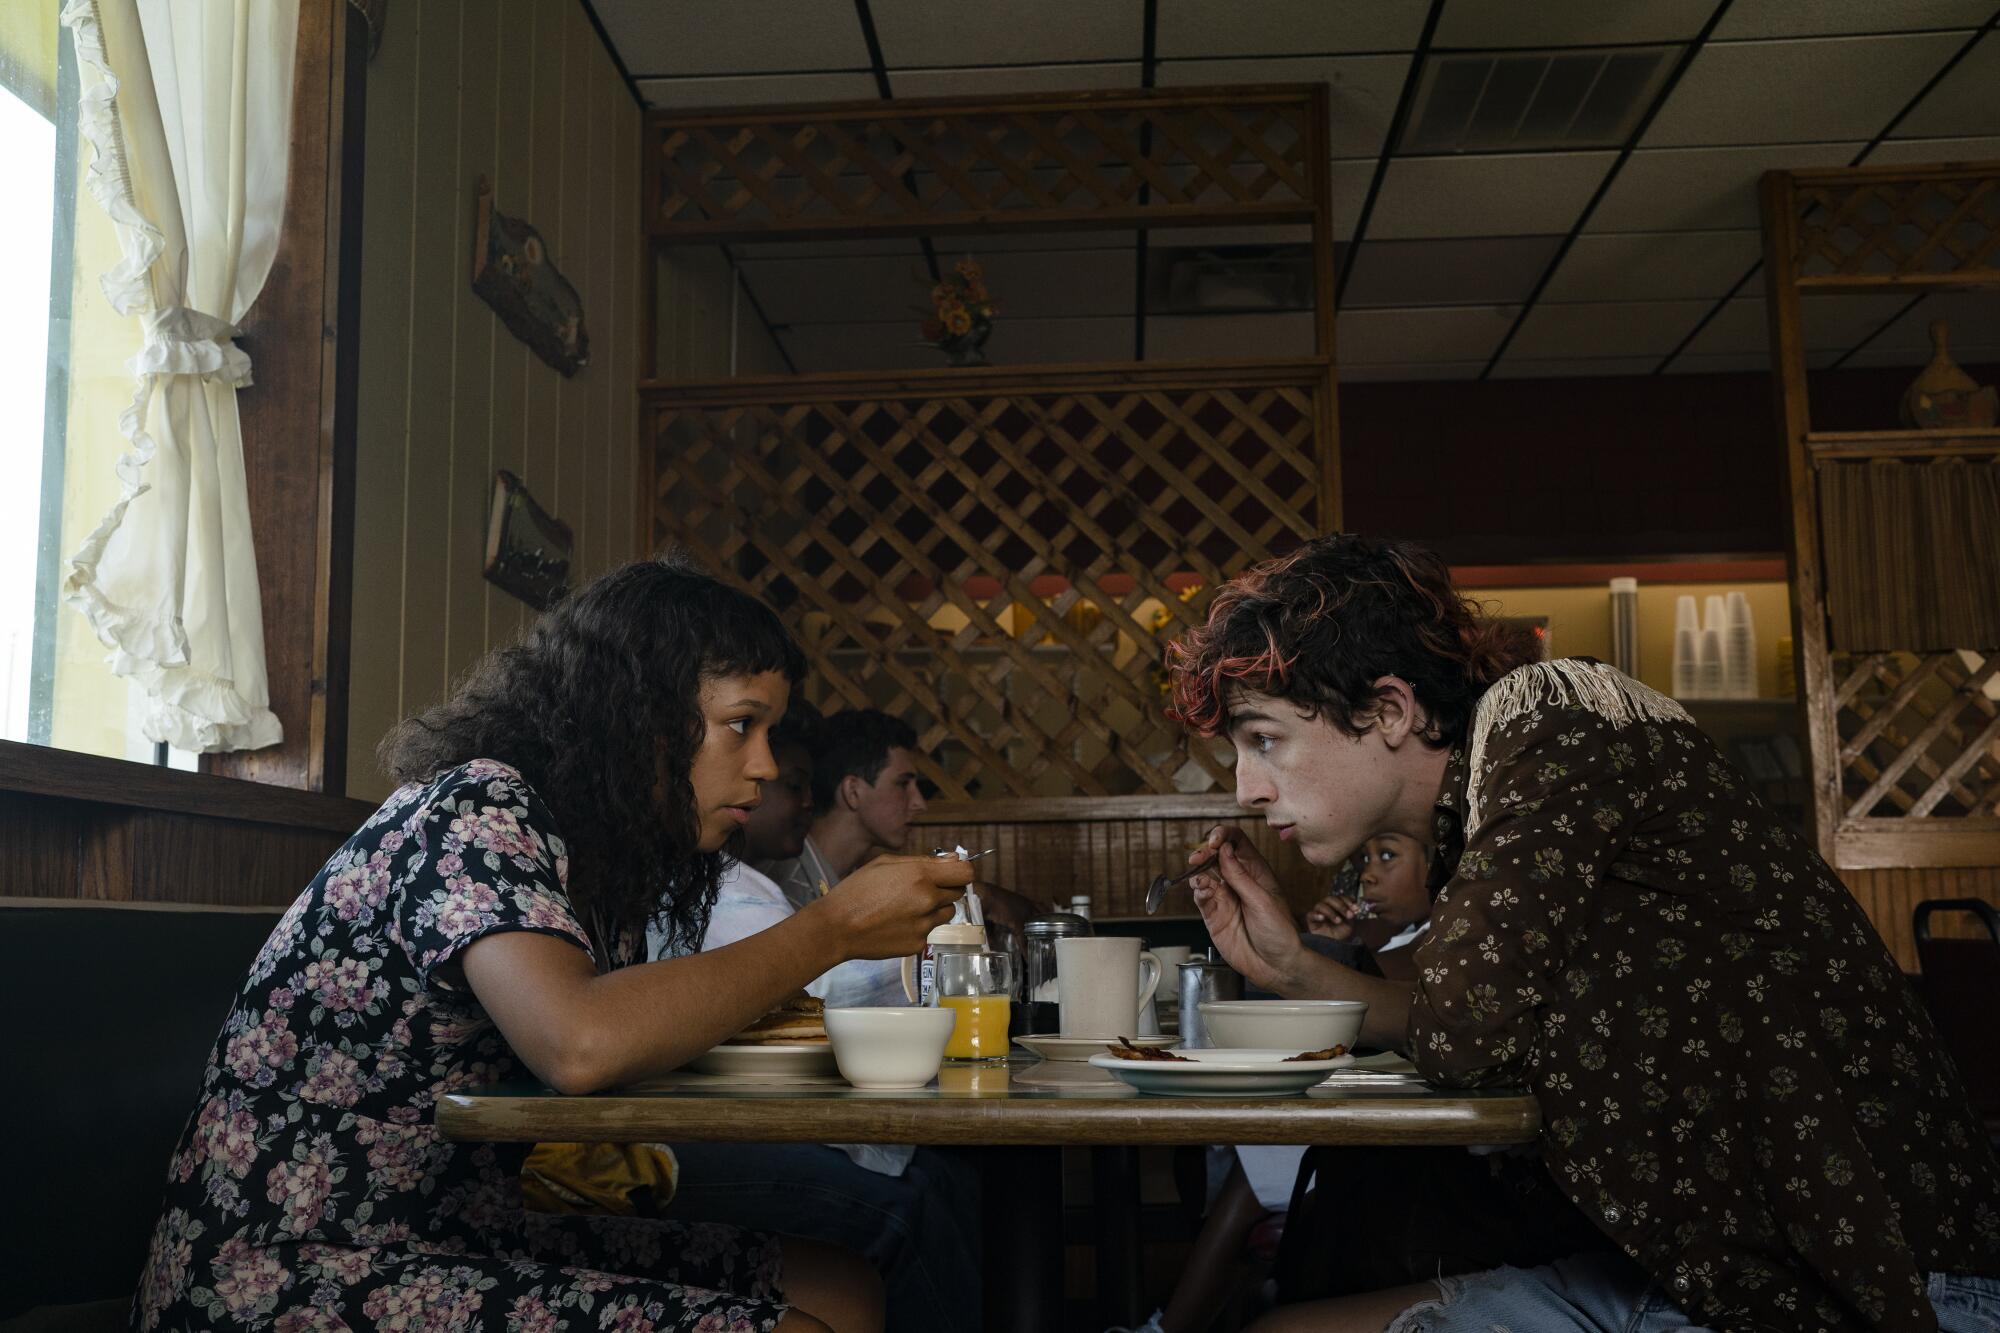 Two teenagers eating breakfast at a diner